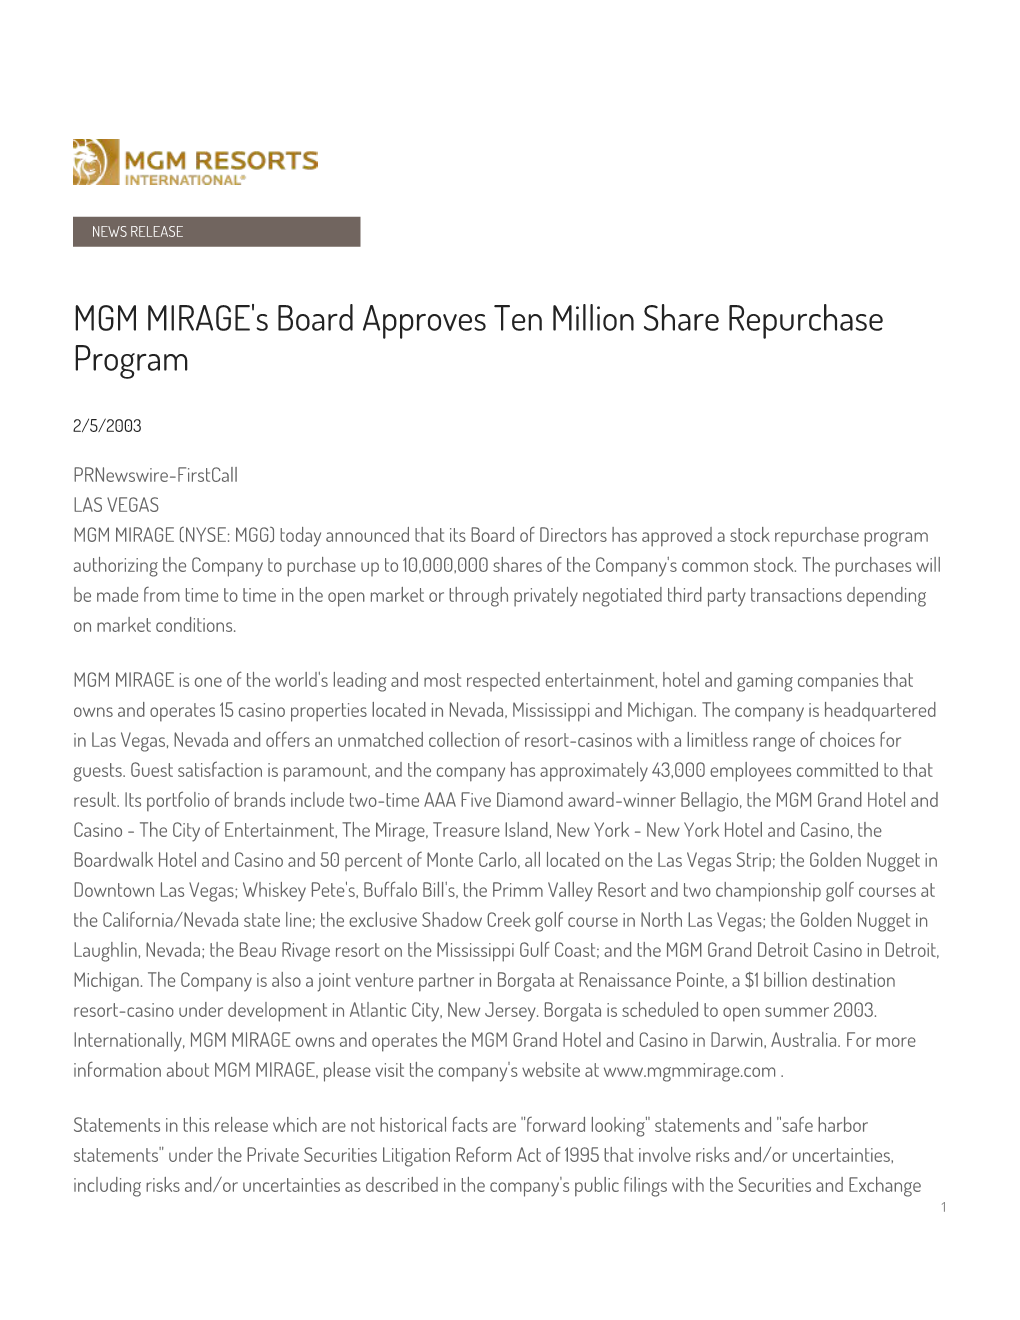 MGM MIRAGE's Board Approves Ten Million Share Repurchase Program